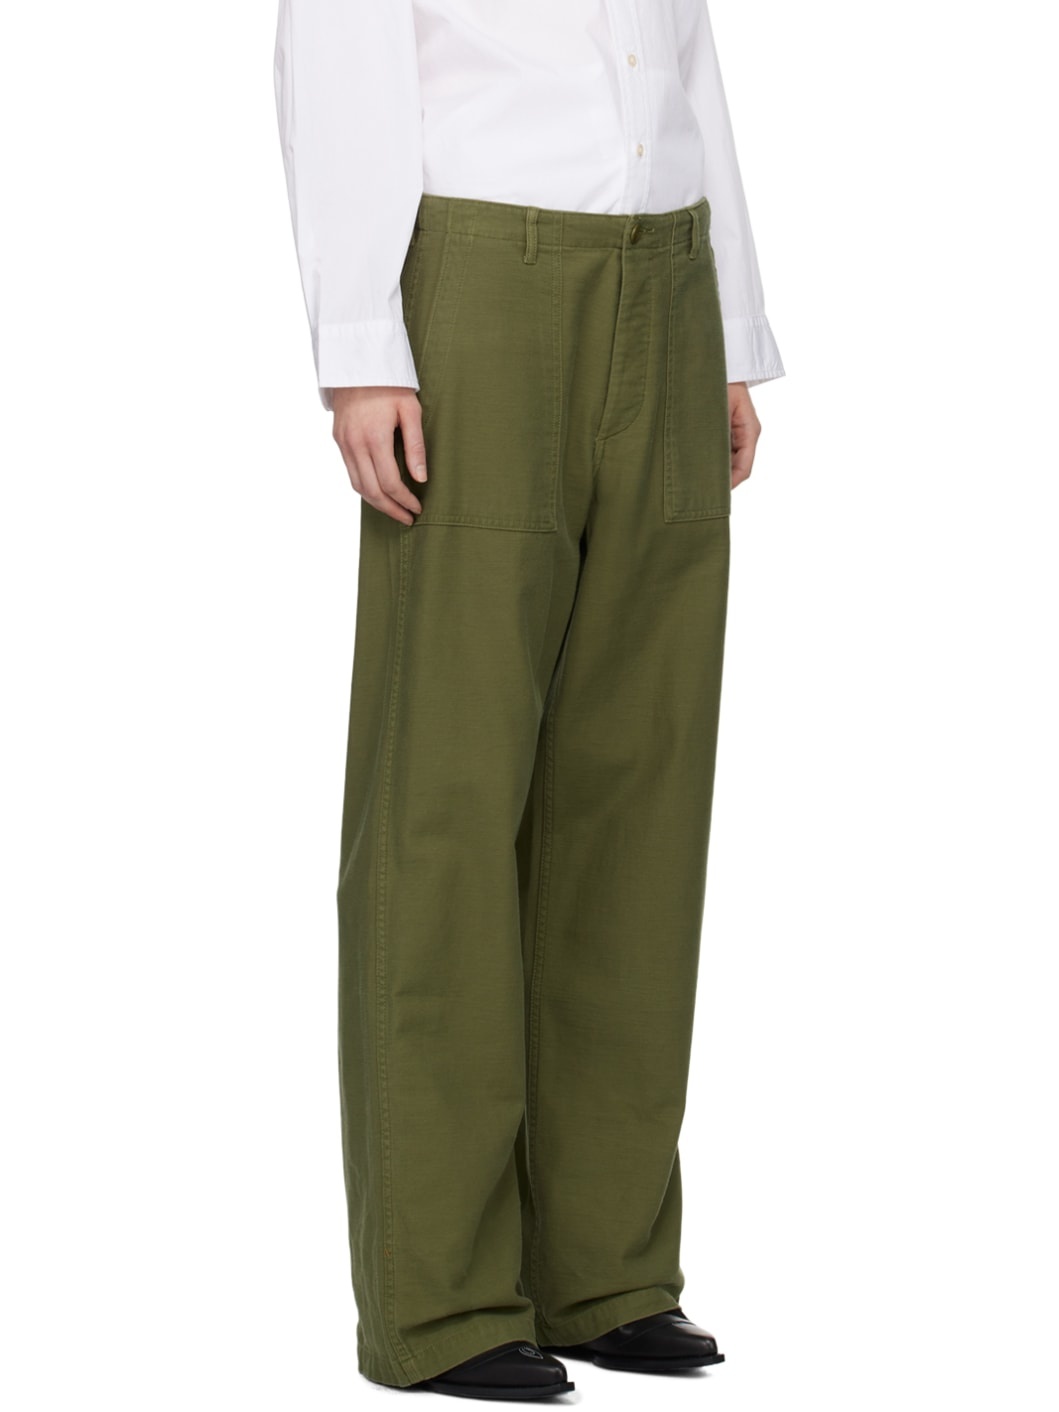 Green Utility Trousers - 2